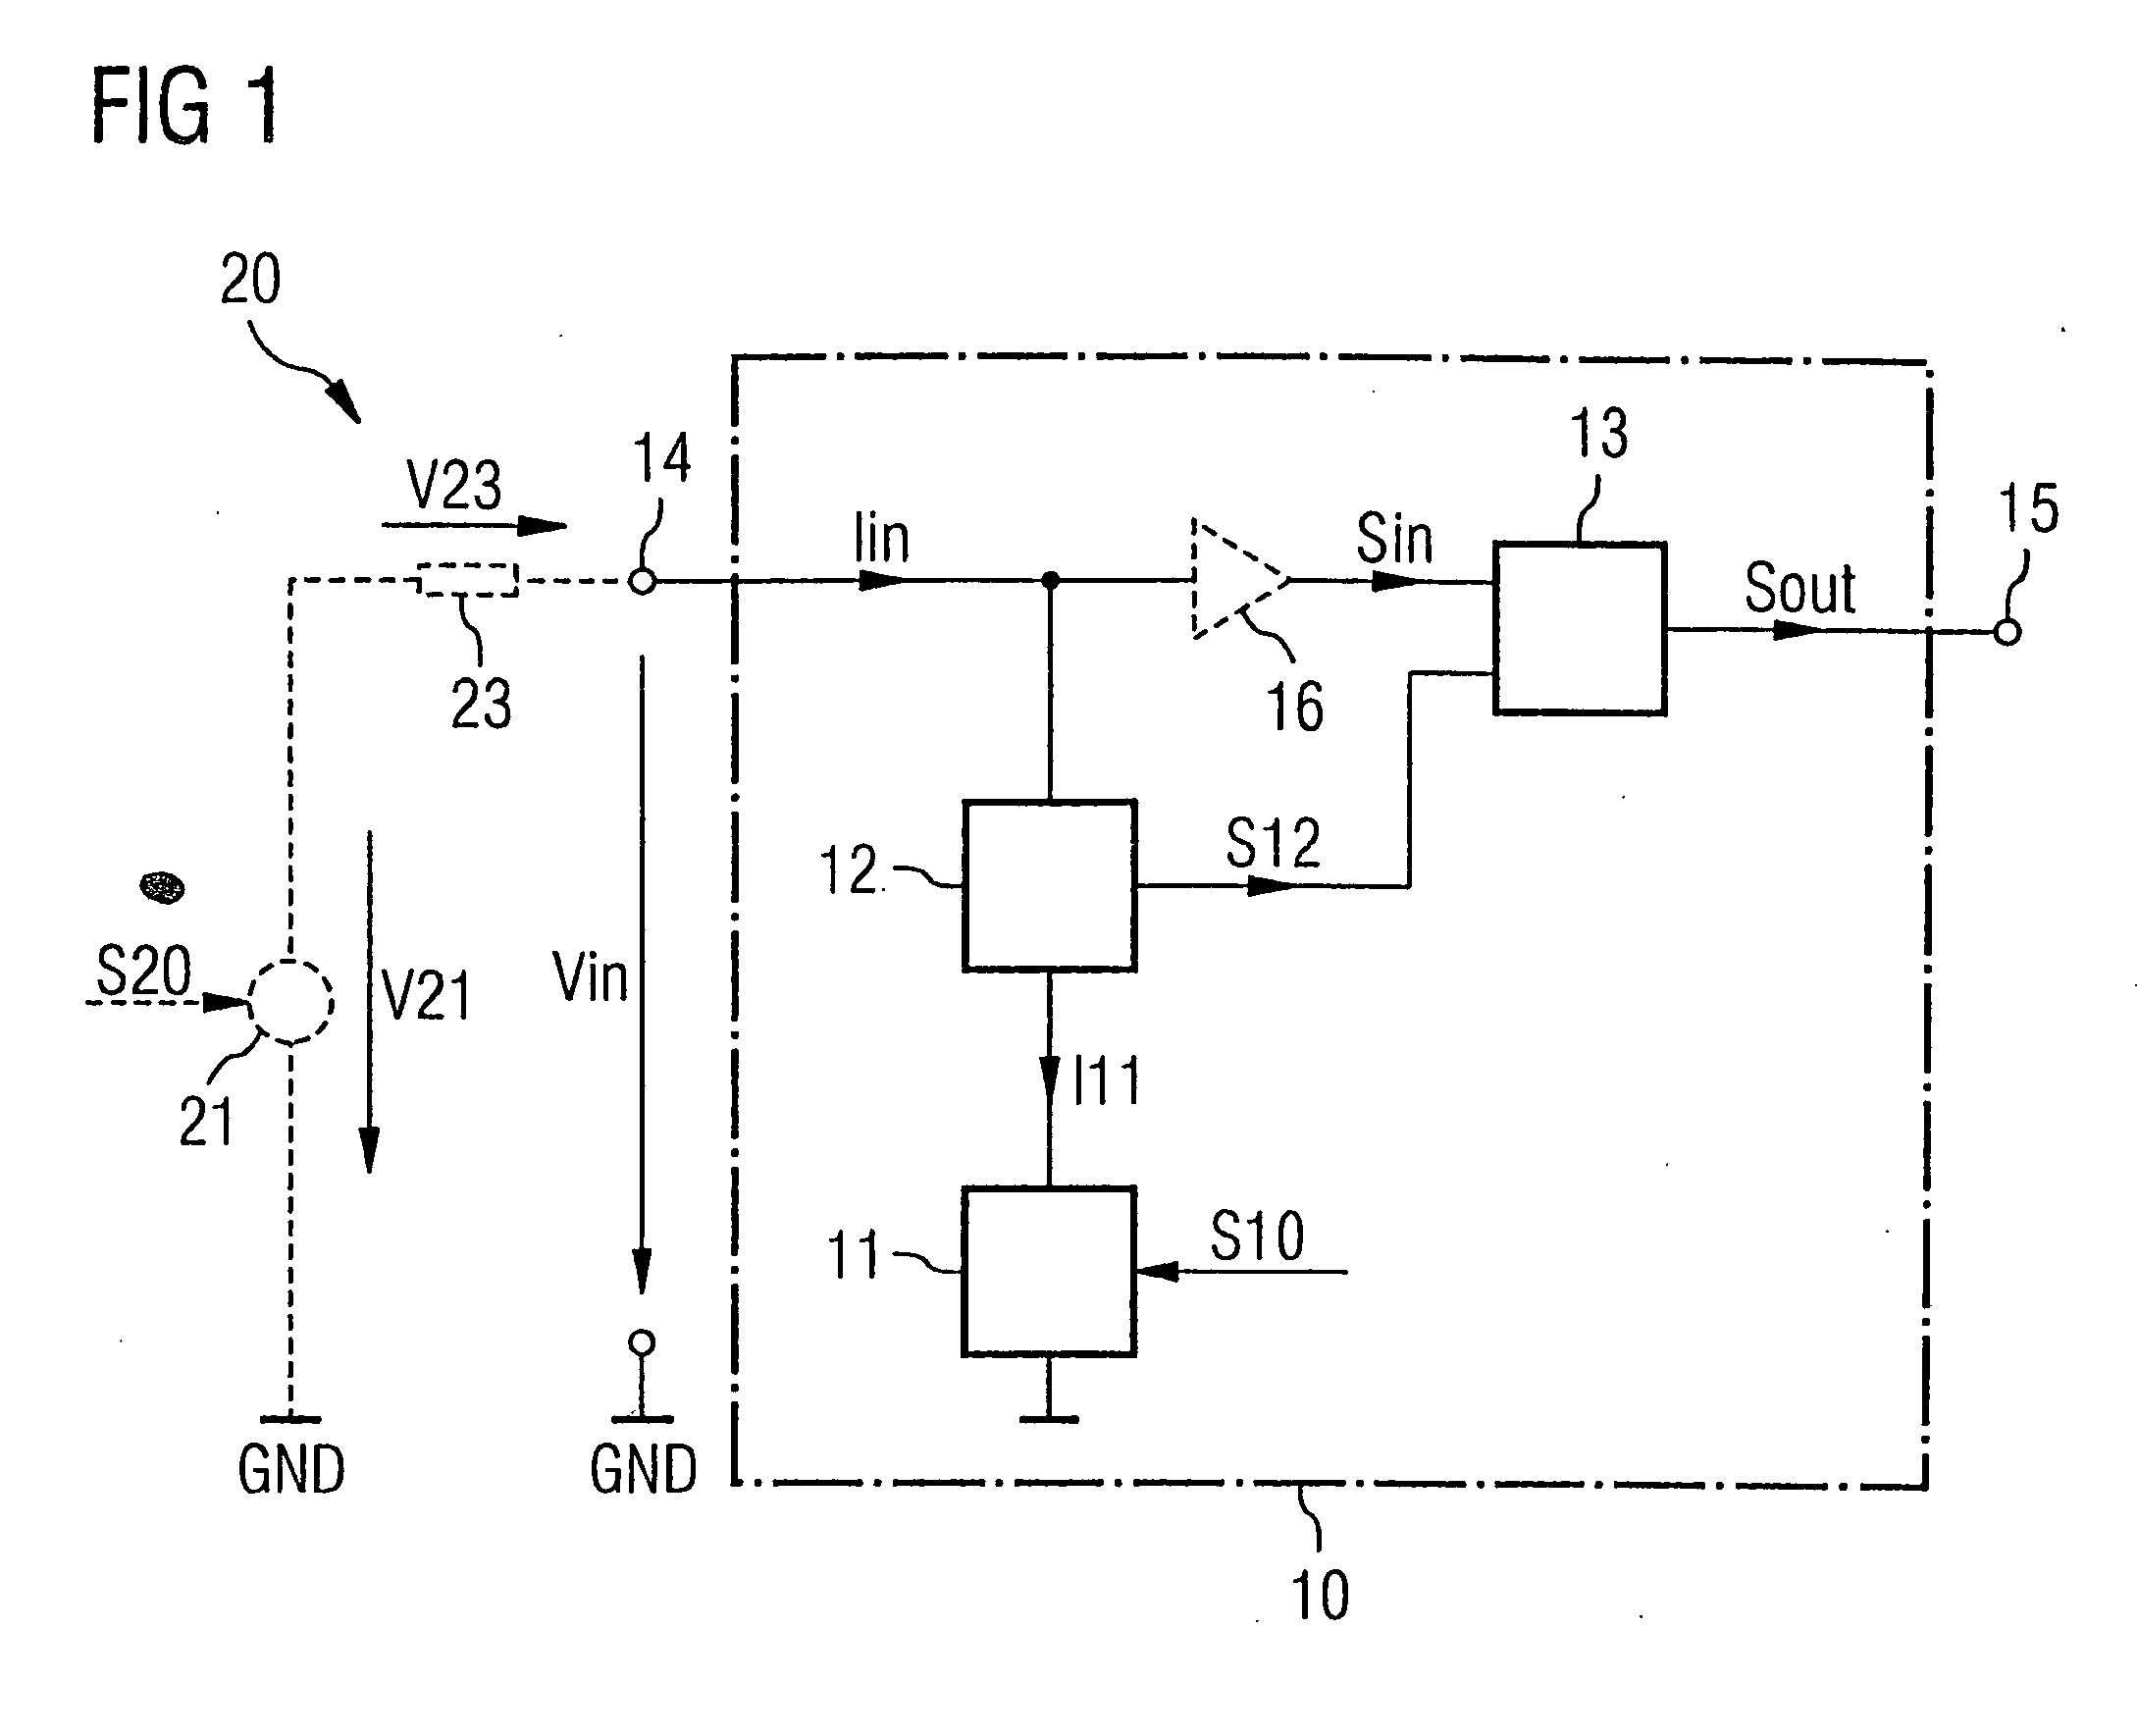 Input/output interface with current sensing